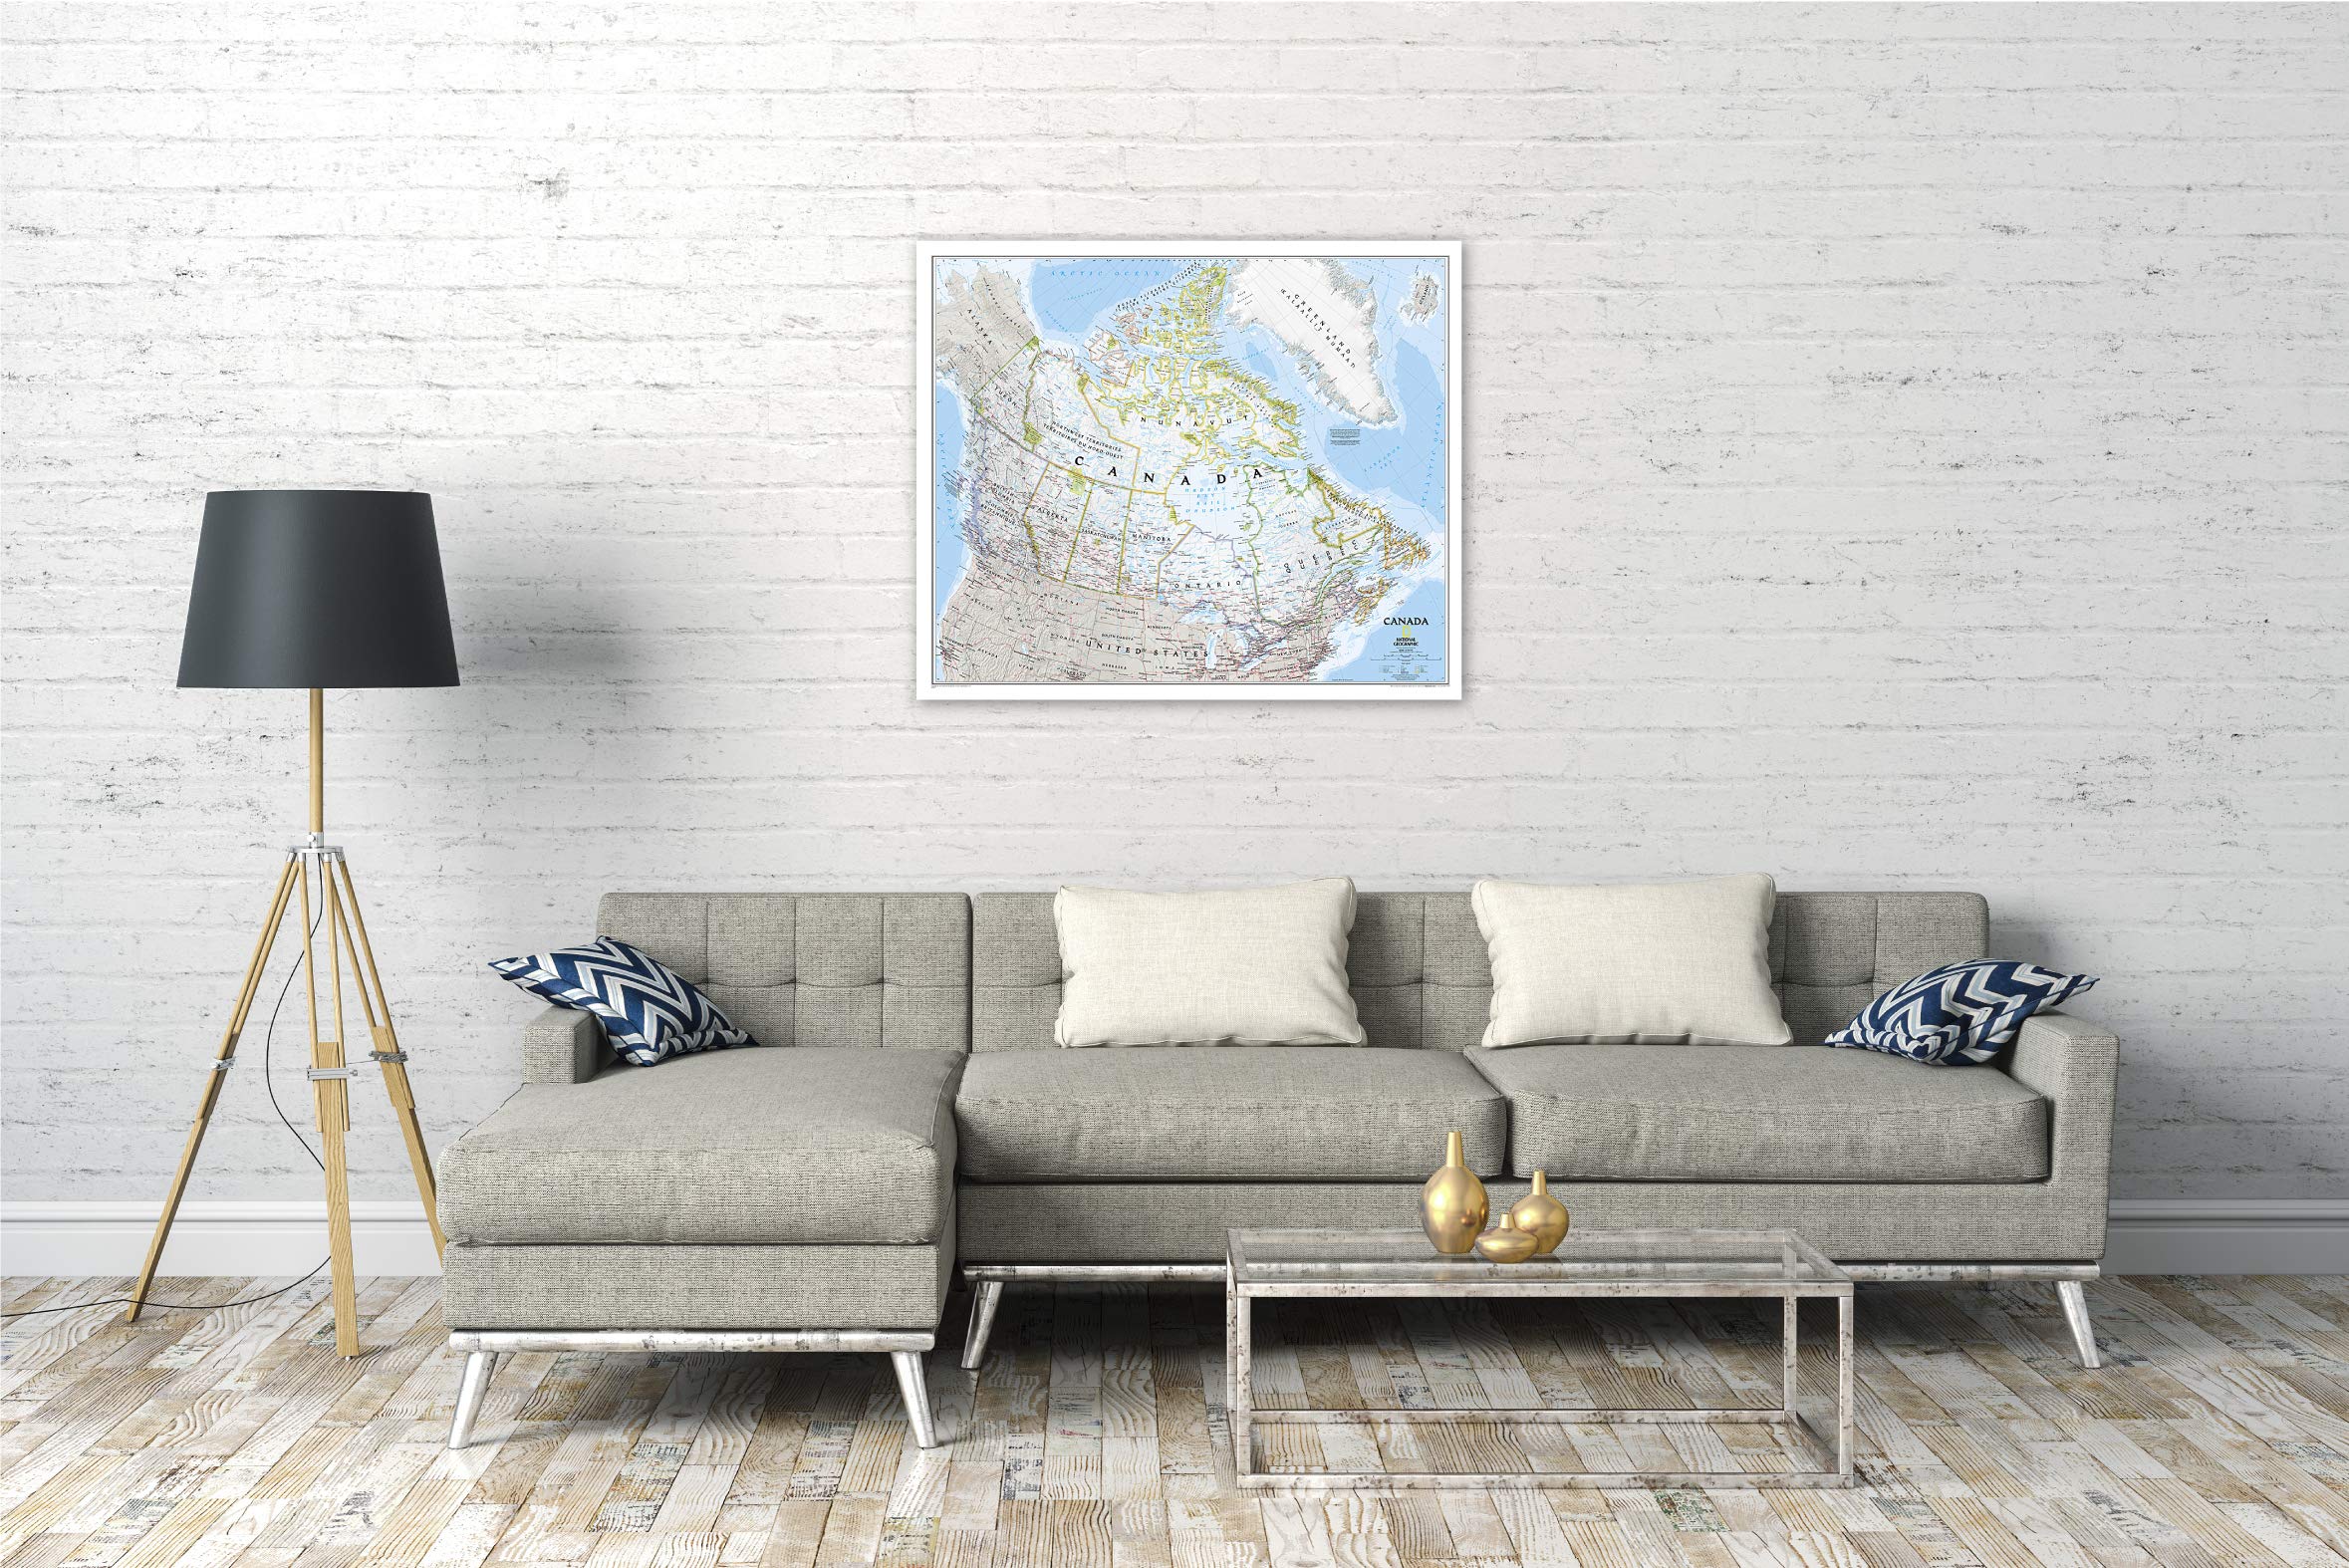 National Geographic Canada Wall Map - Classic - Laminated (38 x 32 in) (National Geographic Reference Map)